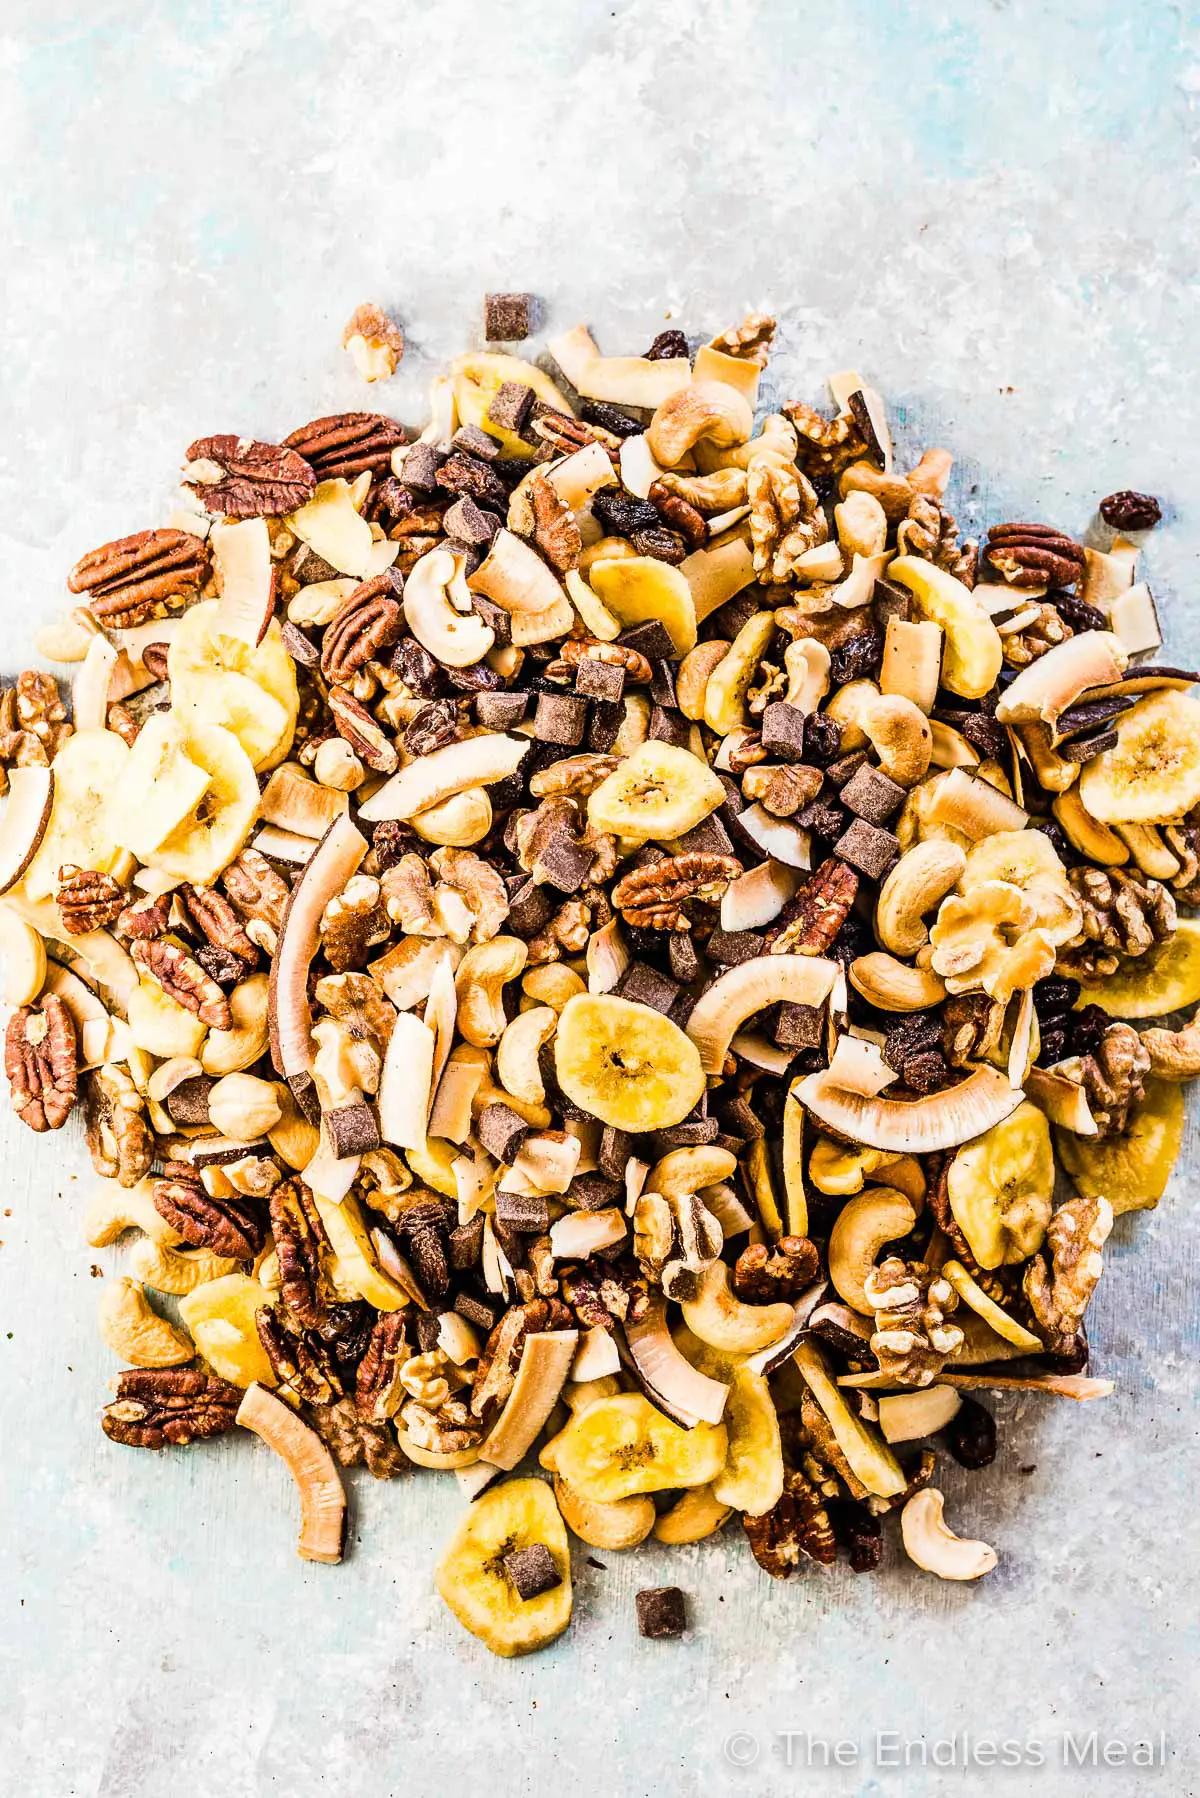 A colorful mix of chopped nuts, sliced bananas, coconut shavings, and chocolate chunks spread out on a light surface, creating a tempting composition indicative of a tasty granola or trail mix.